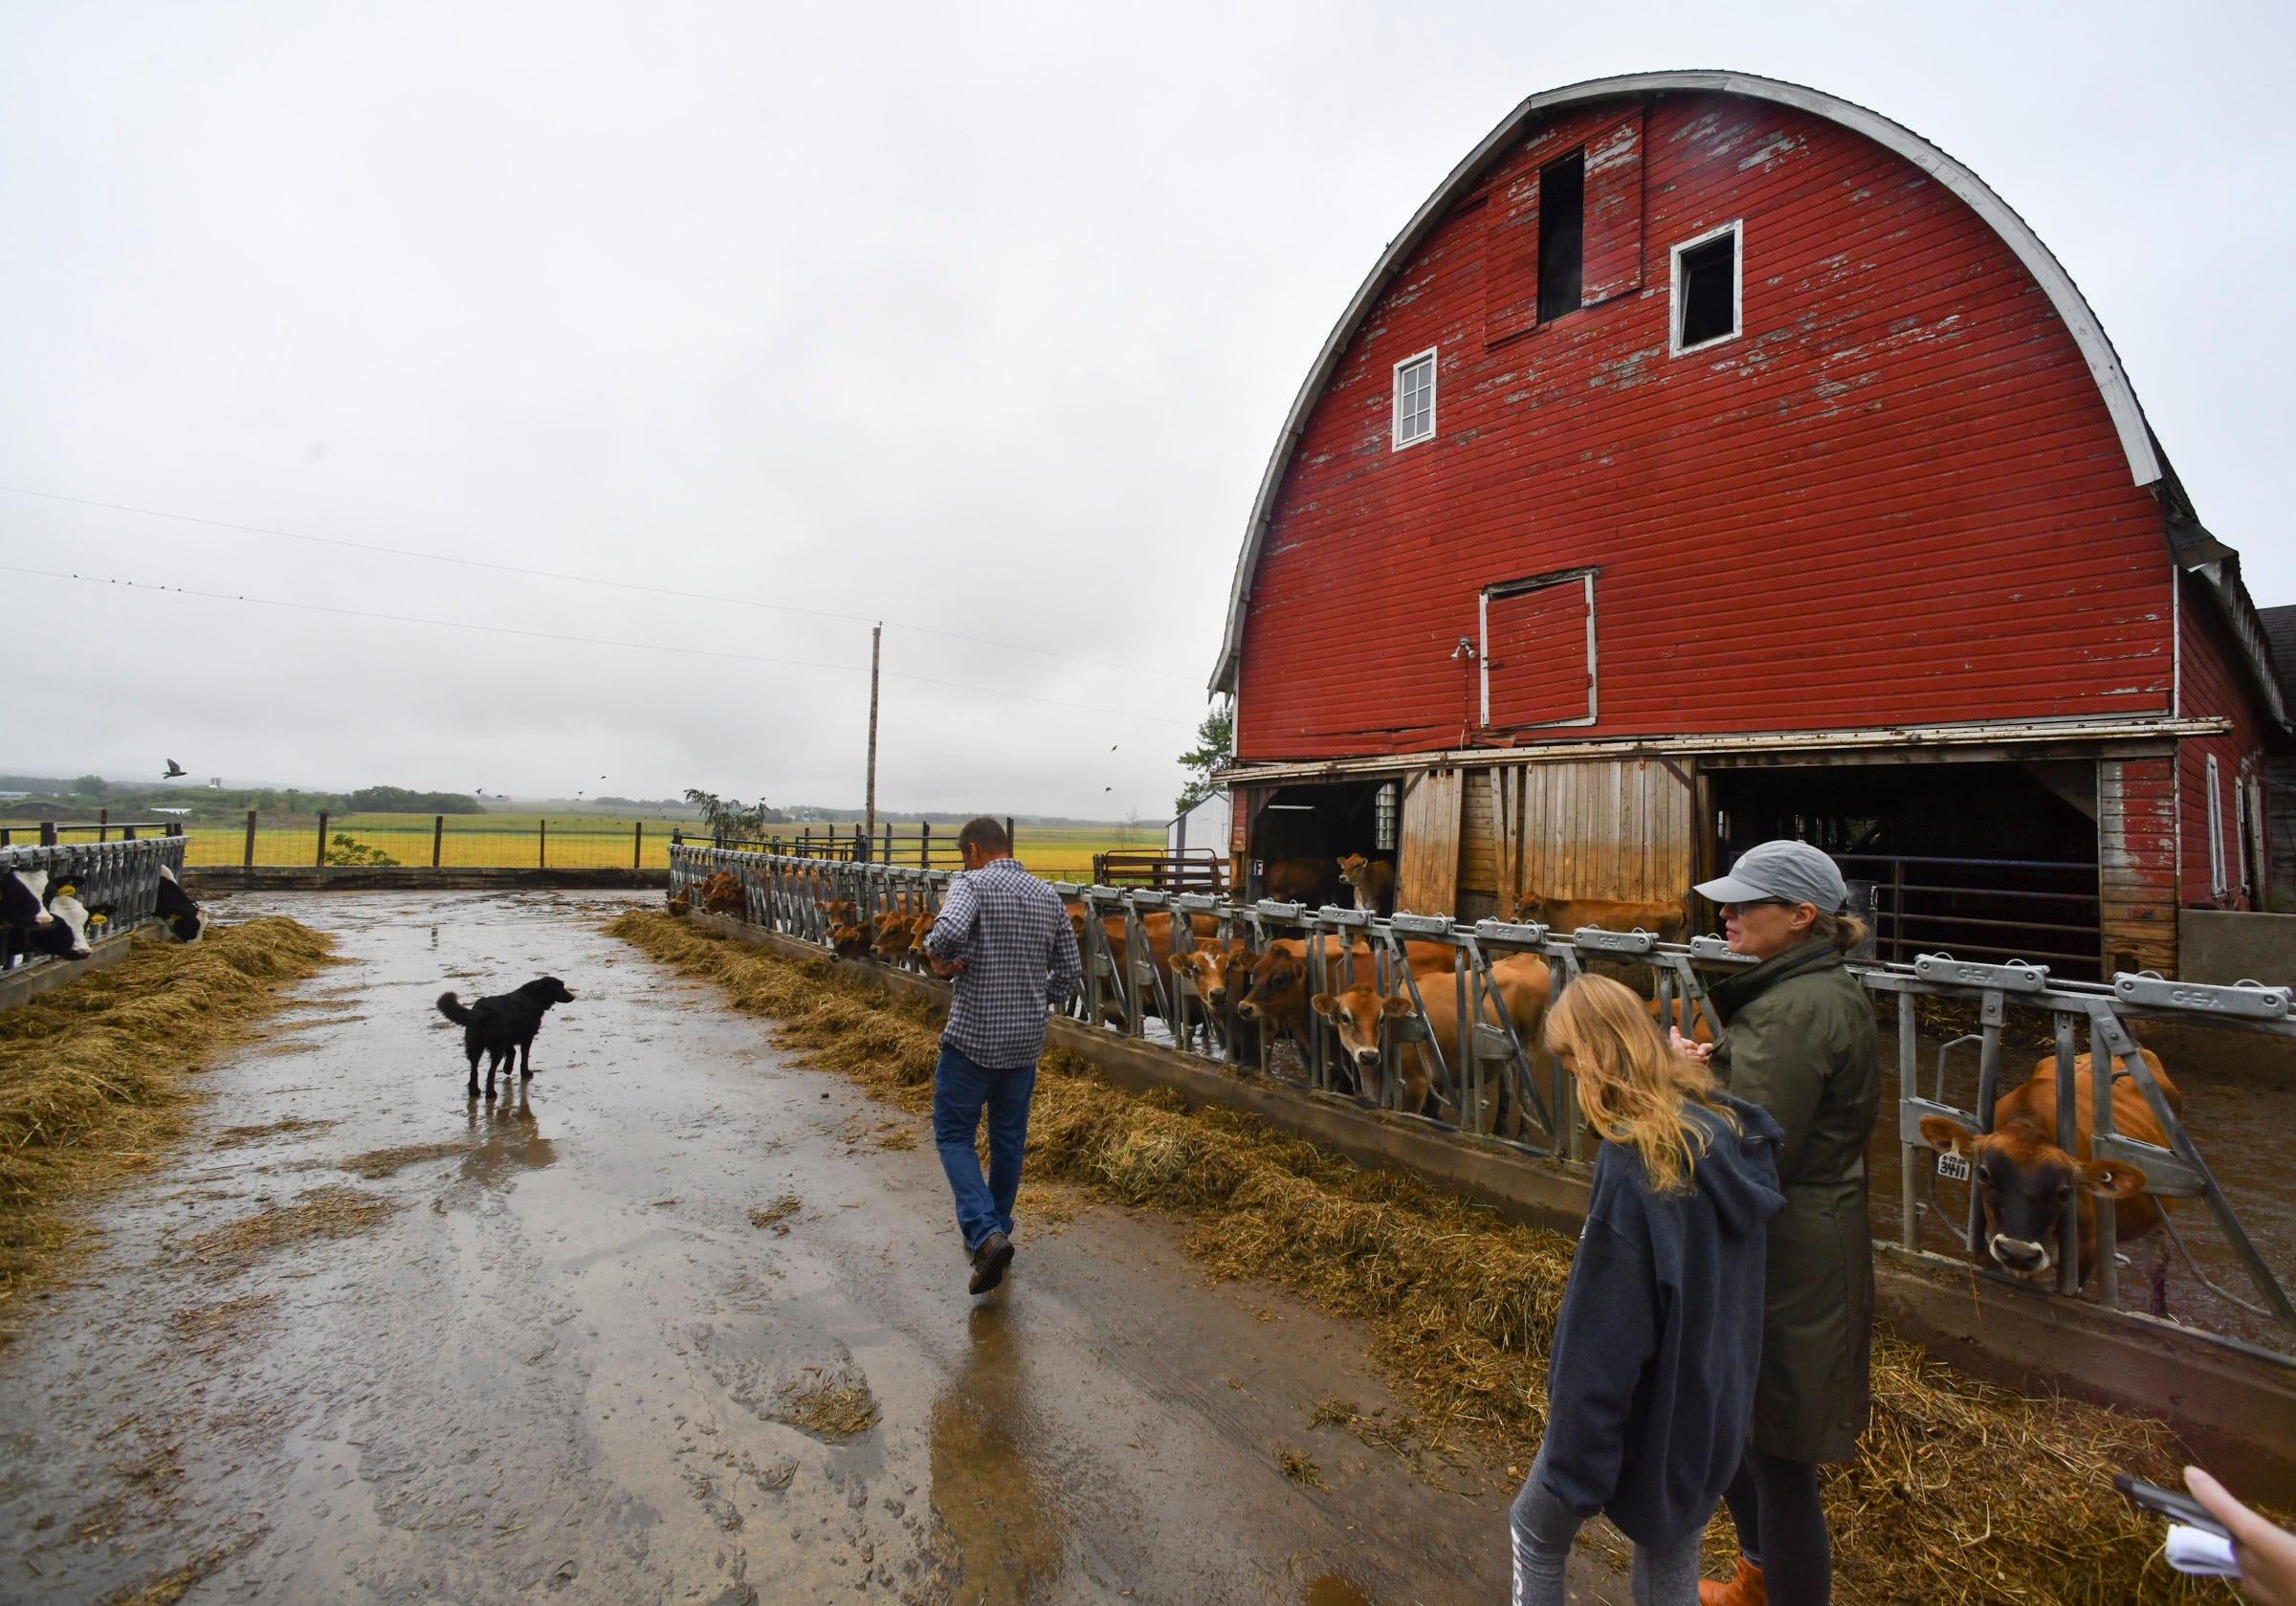 Members of the Lahr family walk past a barn on their farm Friday, Sept. 3, 2021, near Cold Spring.